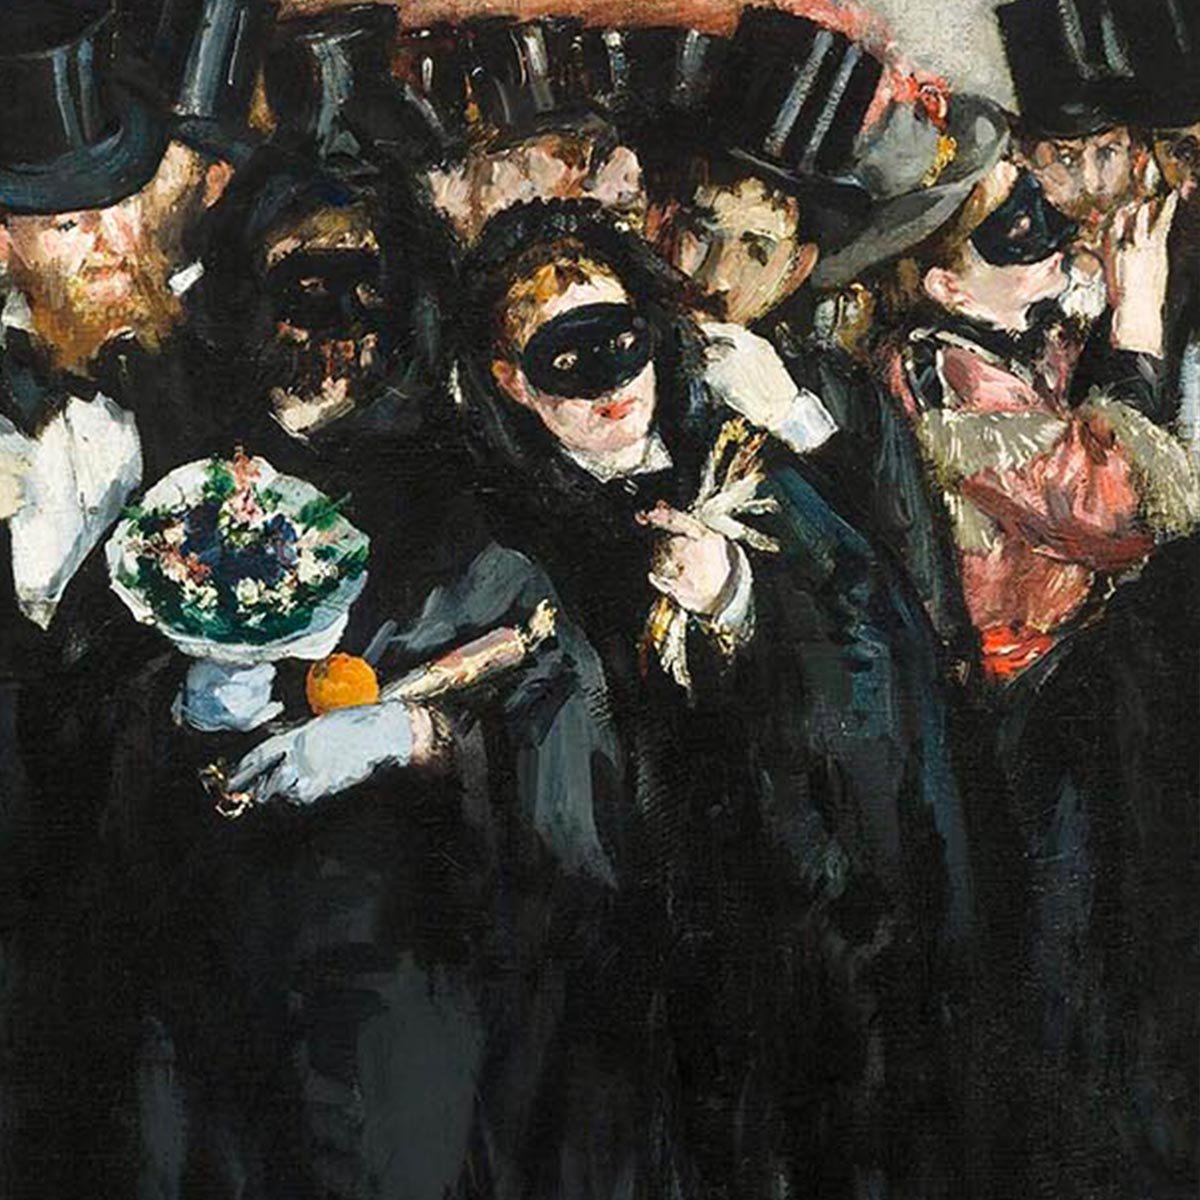 Masked Ball at the Opera by Manet Exhibition Poster